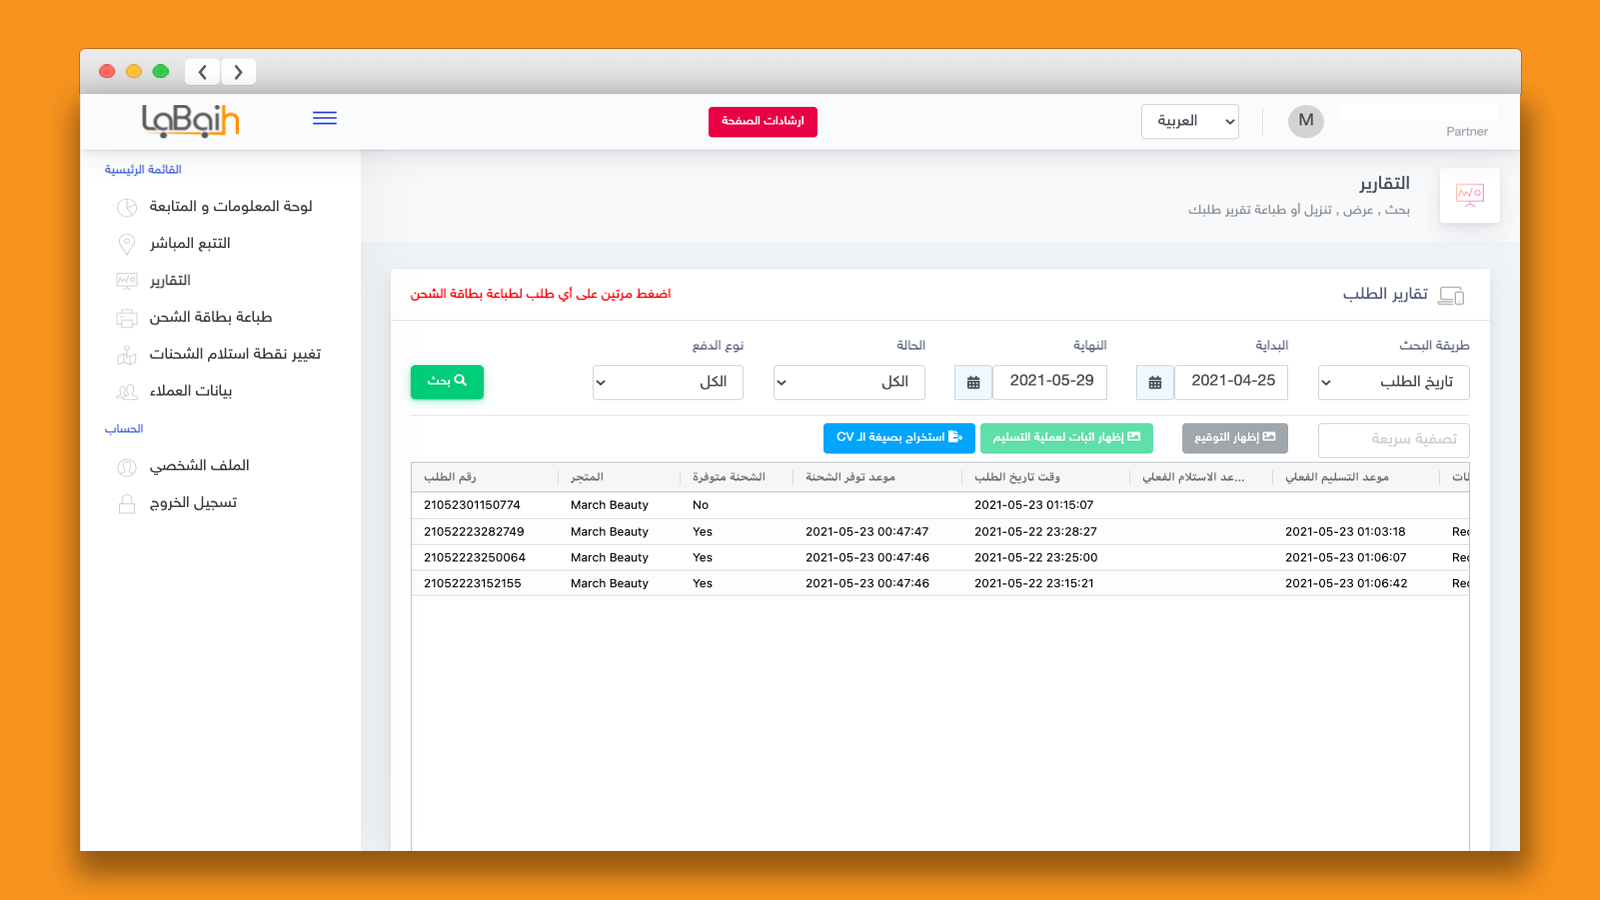 LaBaih is an e-Commerce delivery support service company, offering definitive and technology-backed systems to the e-Commerce businesses across the GCC